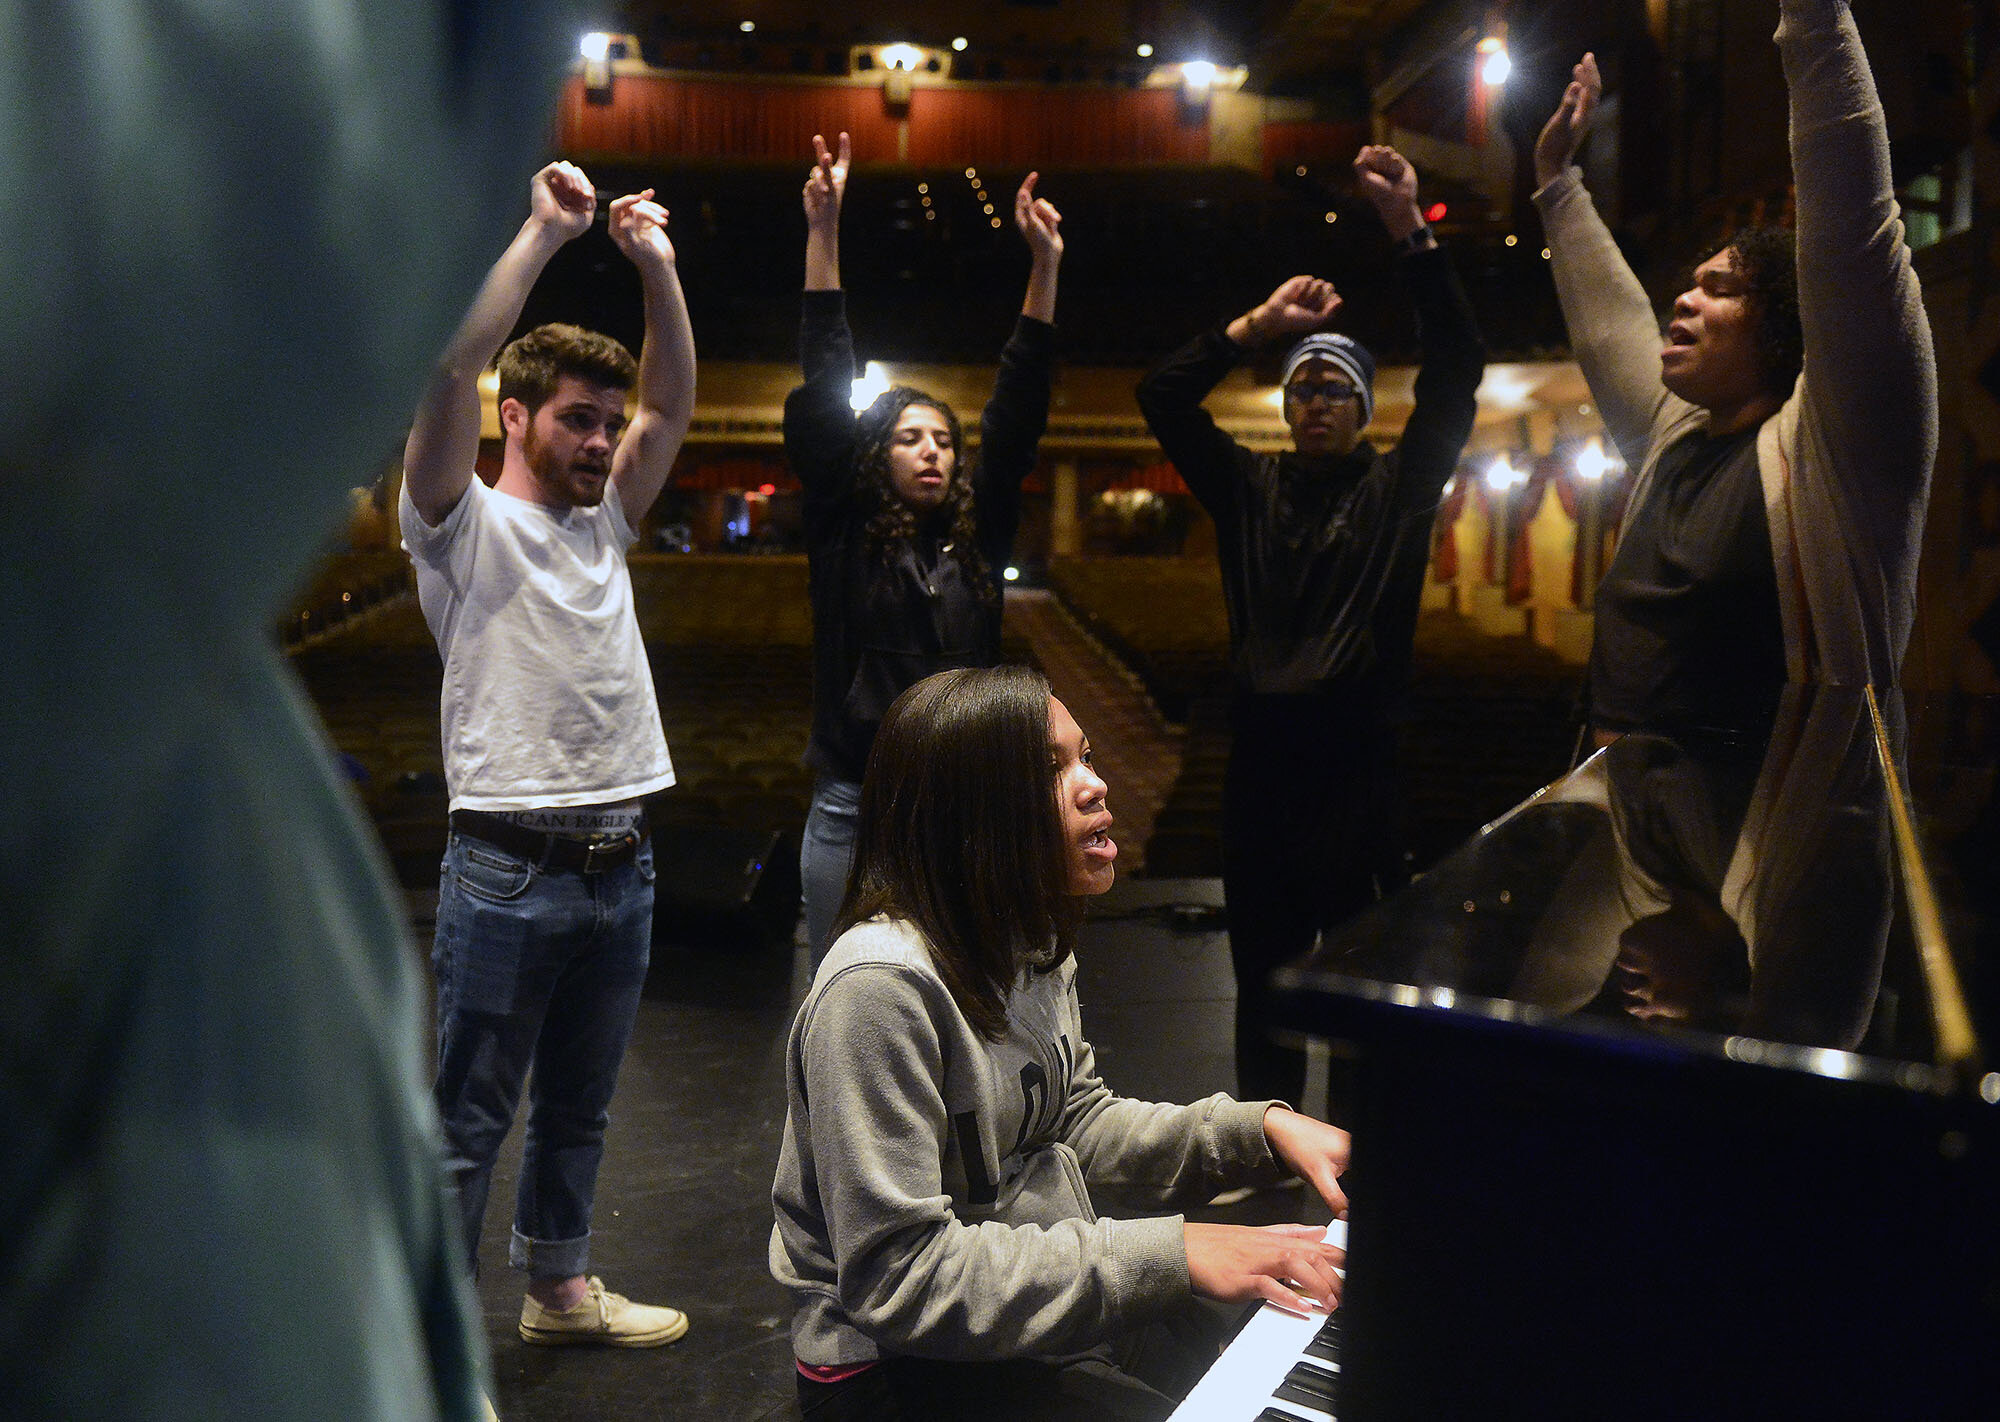  Joy Garrett, an eigth grader at Bennie Dover Jackson Middle School, plays the piano as she warms up with other singers during rehearsals for the New London Talent Show on Thursday, April 5, 2018 at the Garde Arts Center in New London. The 8th annual